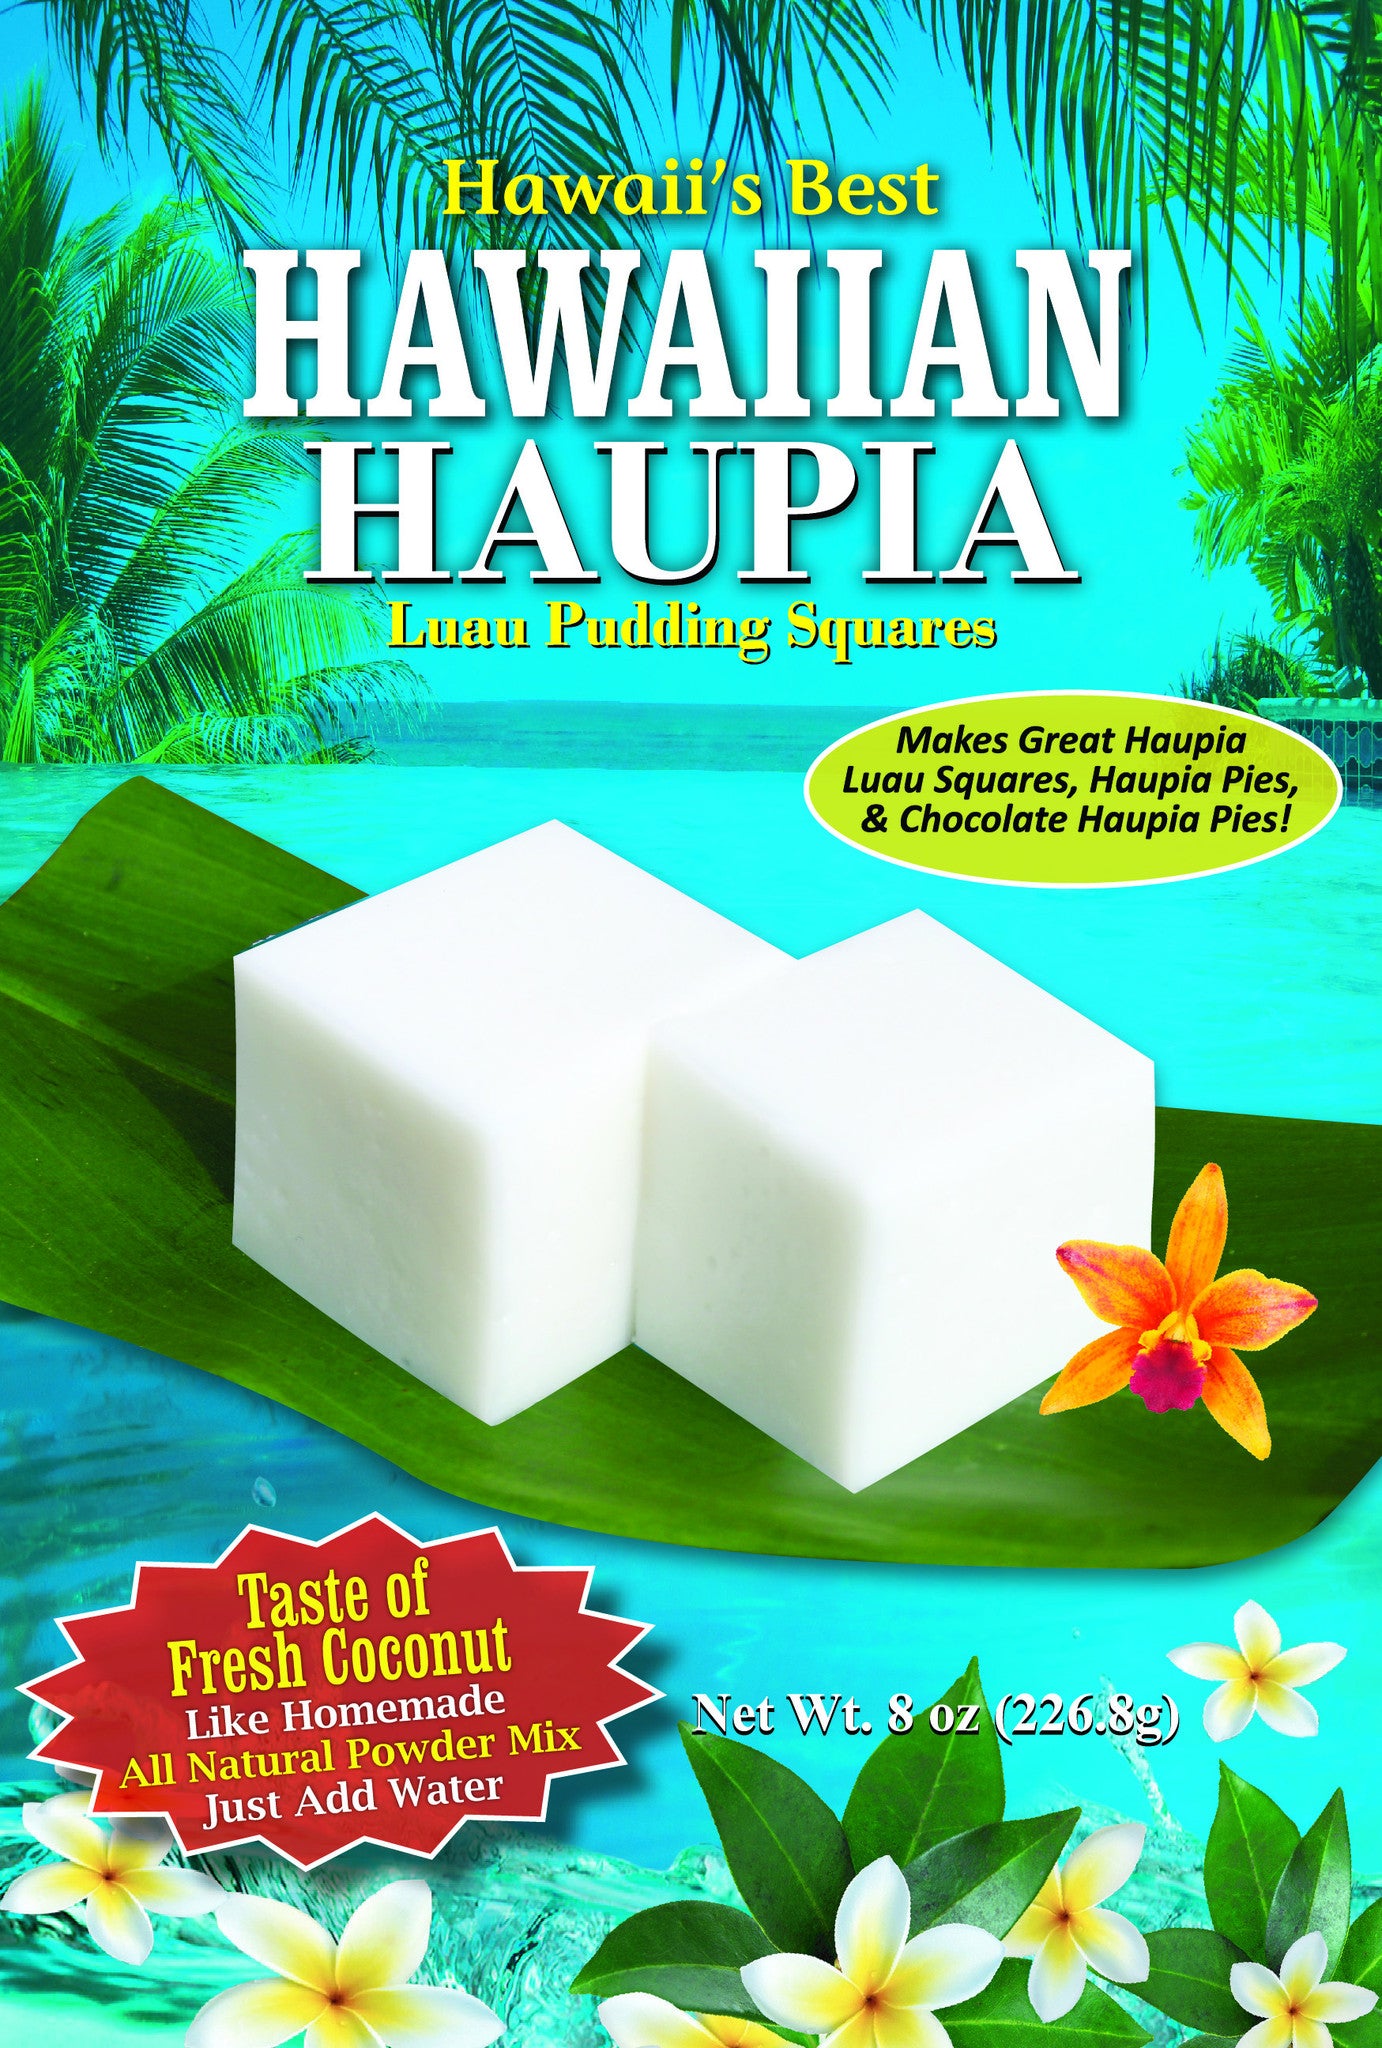 Free Shipping! (10 BAGS - EXTRA VALUE PACK, $5.49 EACH!) HAUPIA MIX (Coconut Pudding Luau Squares).